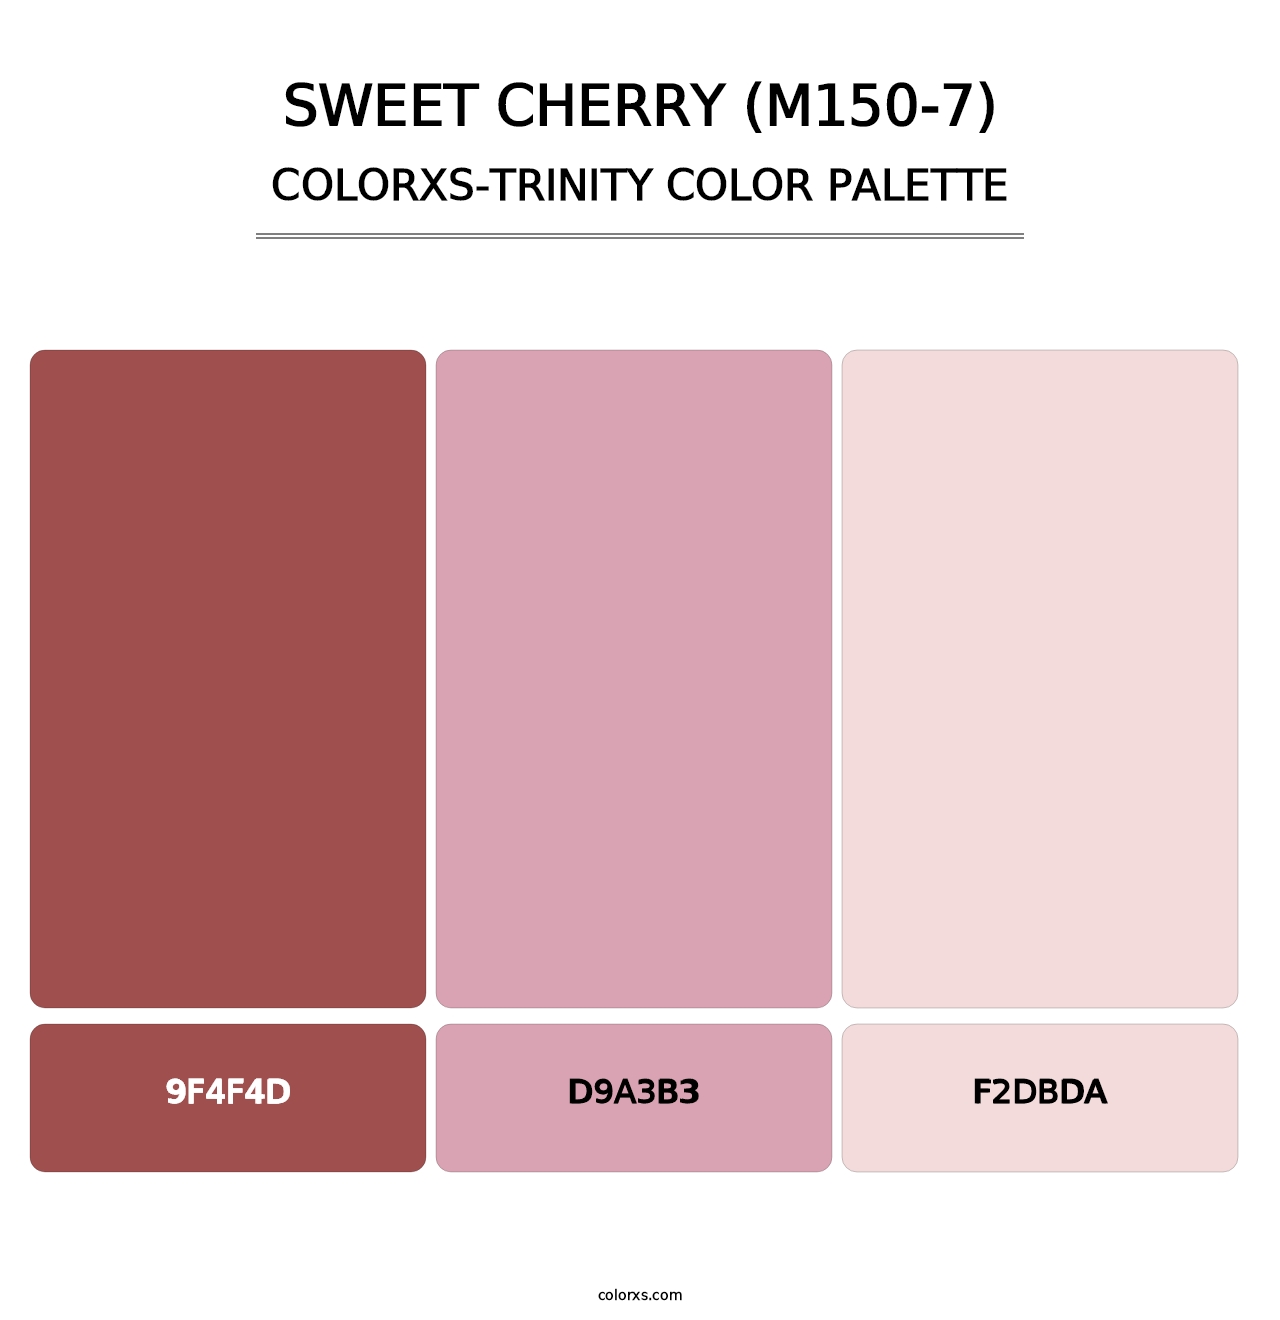 Sweet Cherry (M150-7) - Colorxs Trinity Palette